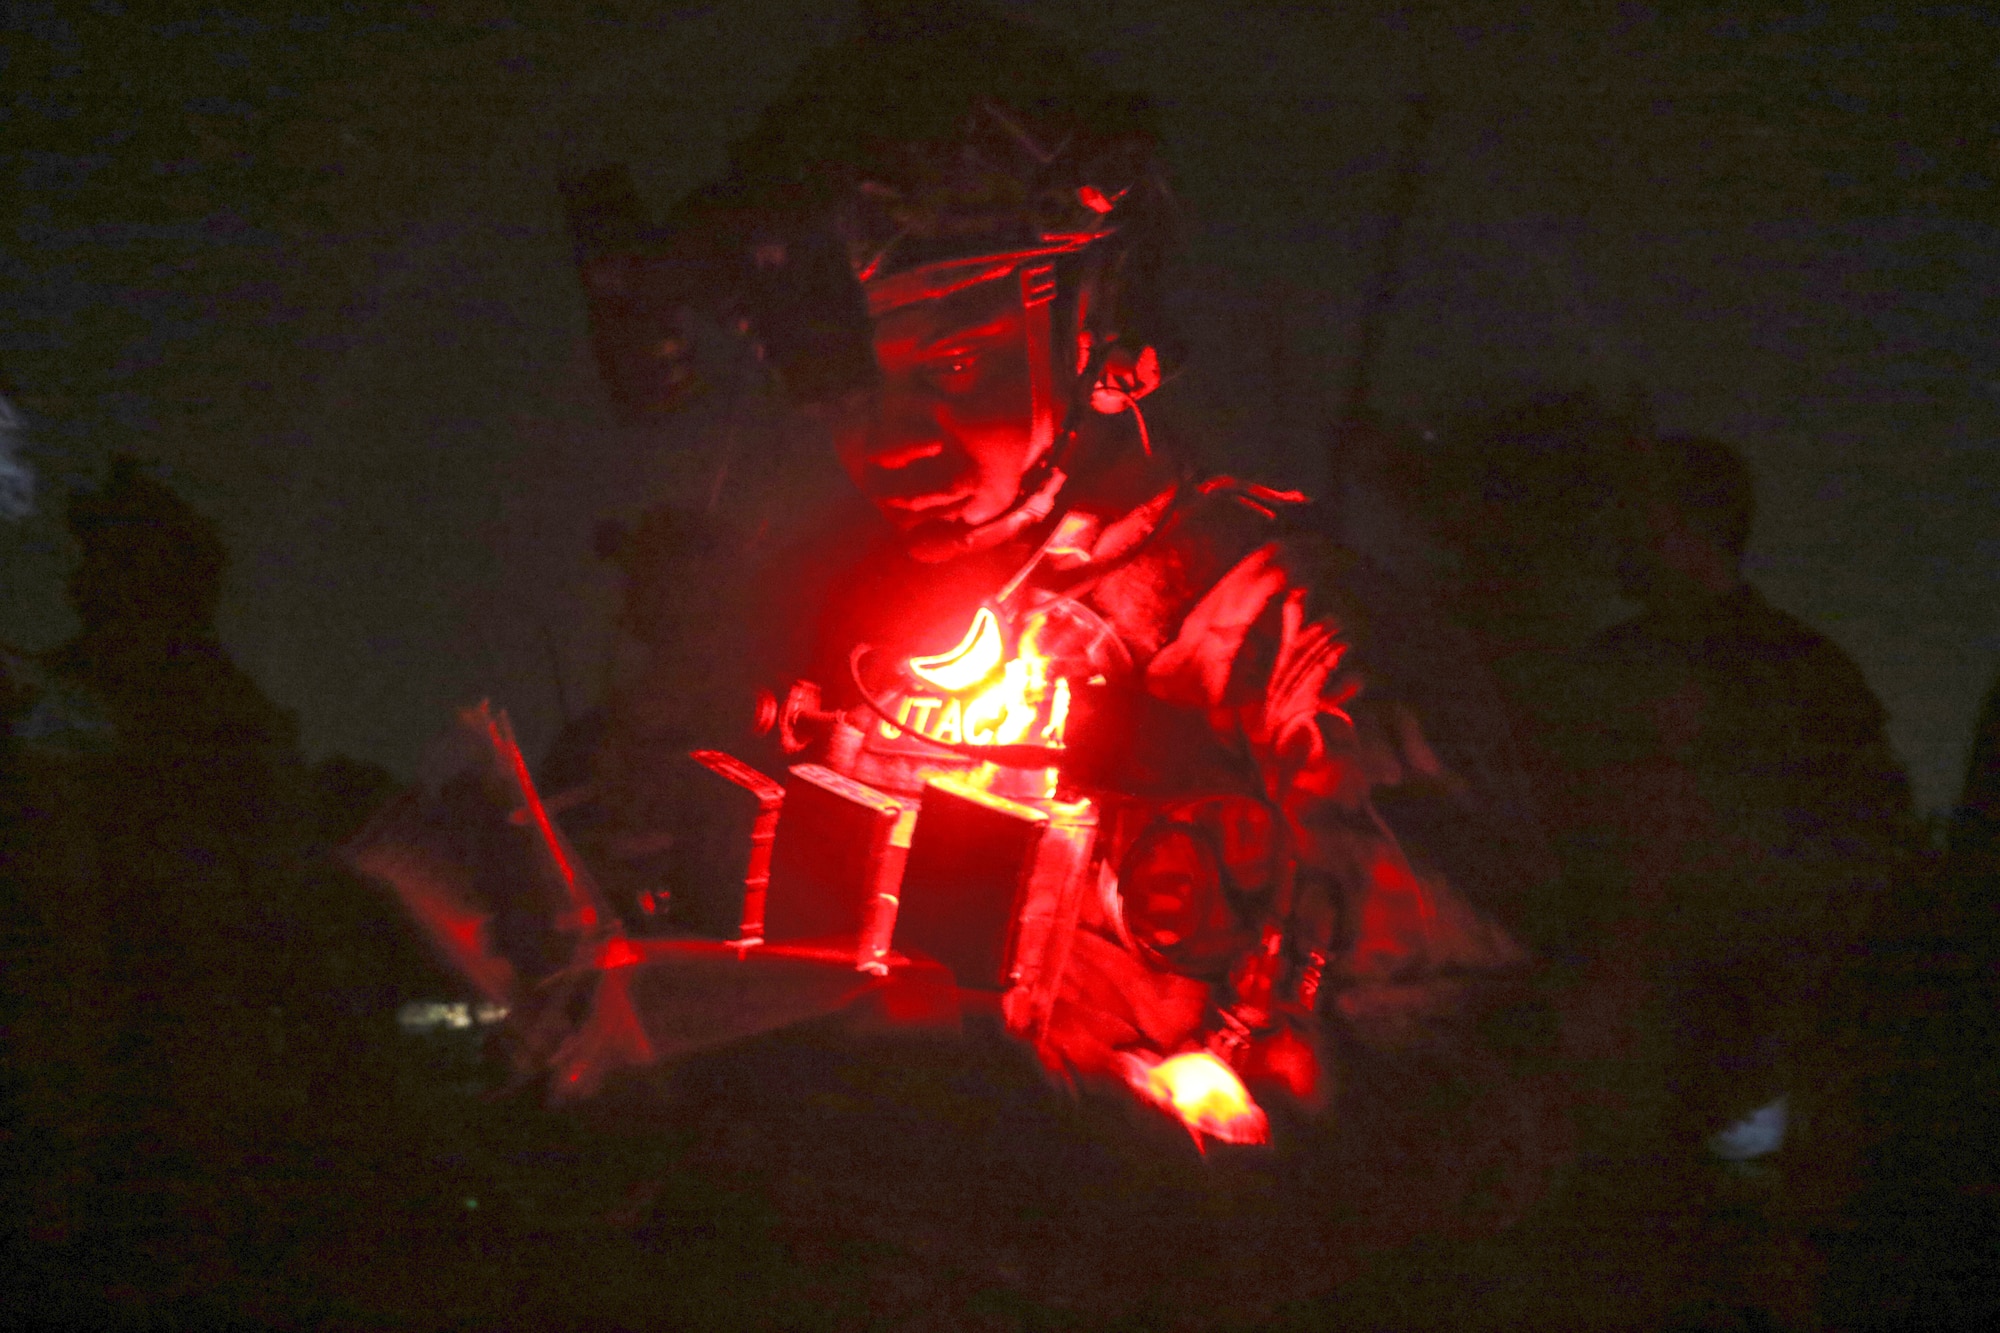 Pennsylvania Air National Guard Staff Sgt. Equeno Ogle, with 148th Air Support Operations Squadron, sends coordinates to an AC-130U gunship during a live fire training mission as part of exercise Southern Strike 18 Oct. 24, 2017, at Camp Shelby Joint Forces Training Center near Hattiesburg, Miss. The exercise provides operational level integration between the Army, Navy, Air Force and Marines using joint and combined doctrine, policies, and procedures to equip our service members with the experience of operating in a joint environment. (U.S. Army National Guard photo by Spc. Christopher Shannon)